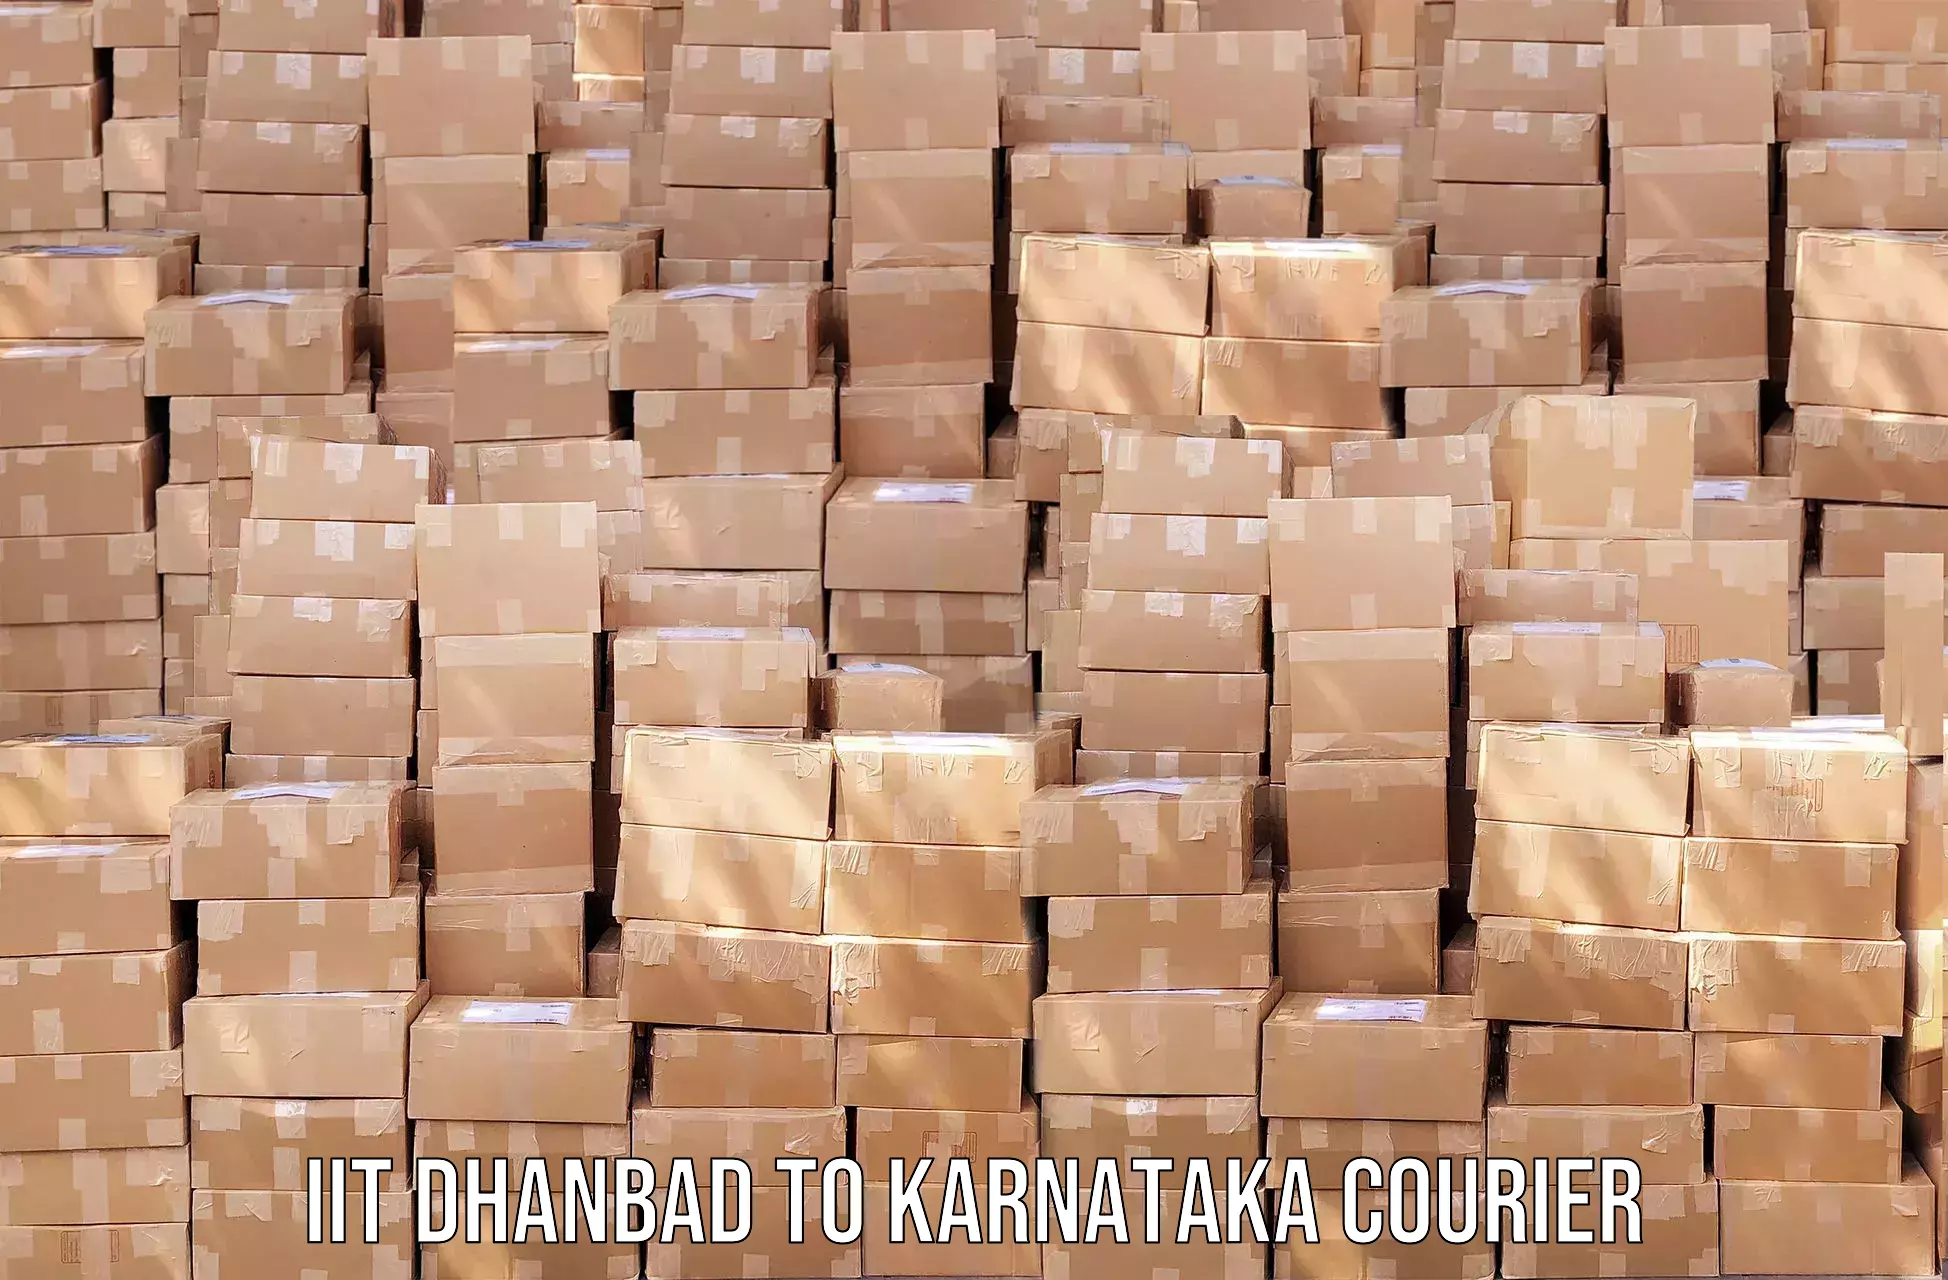 Courier app IIT Dhanbad to Sirsi